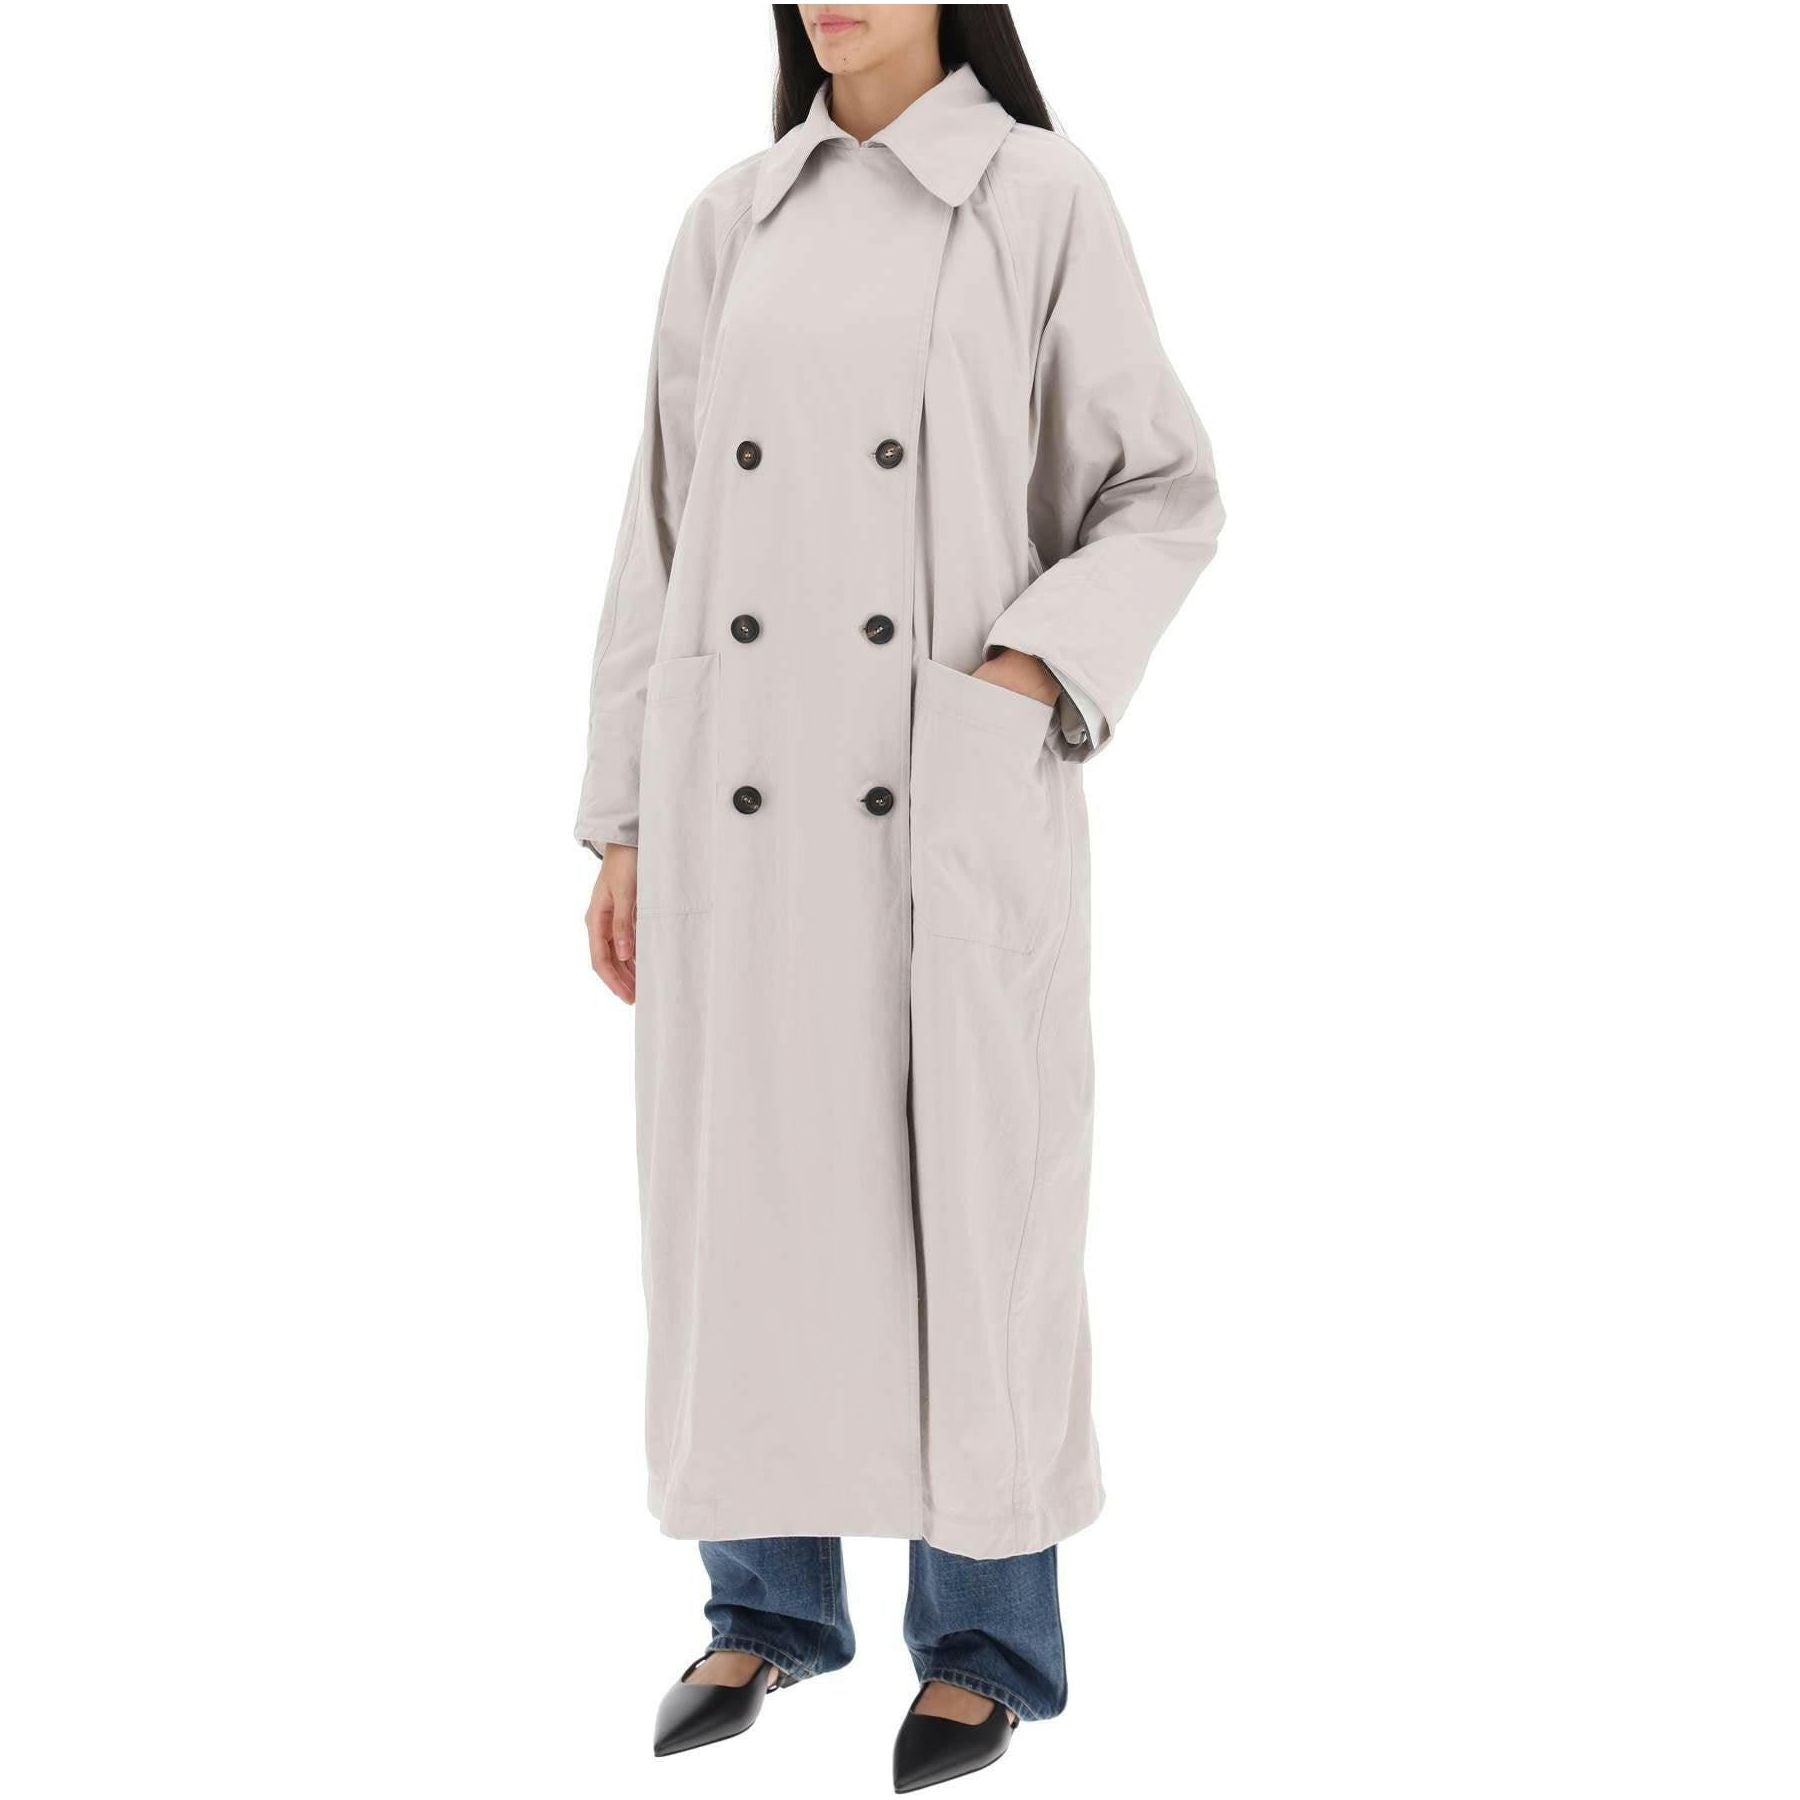 Double-Breasted Trench Coat With Shiny Cuff Details BRUNELLO CUCINELLI JOHN JULIA.